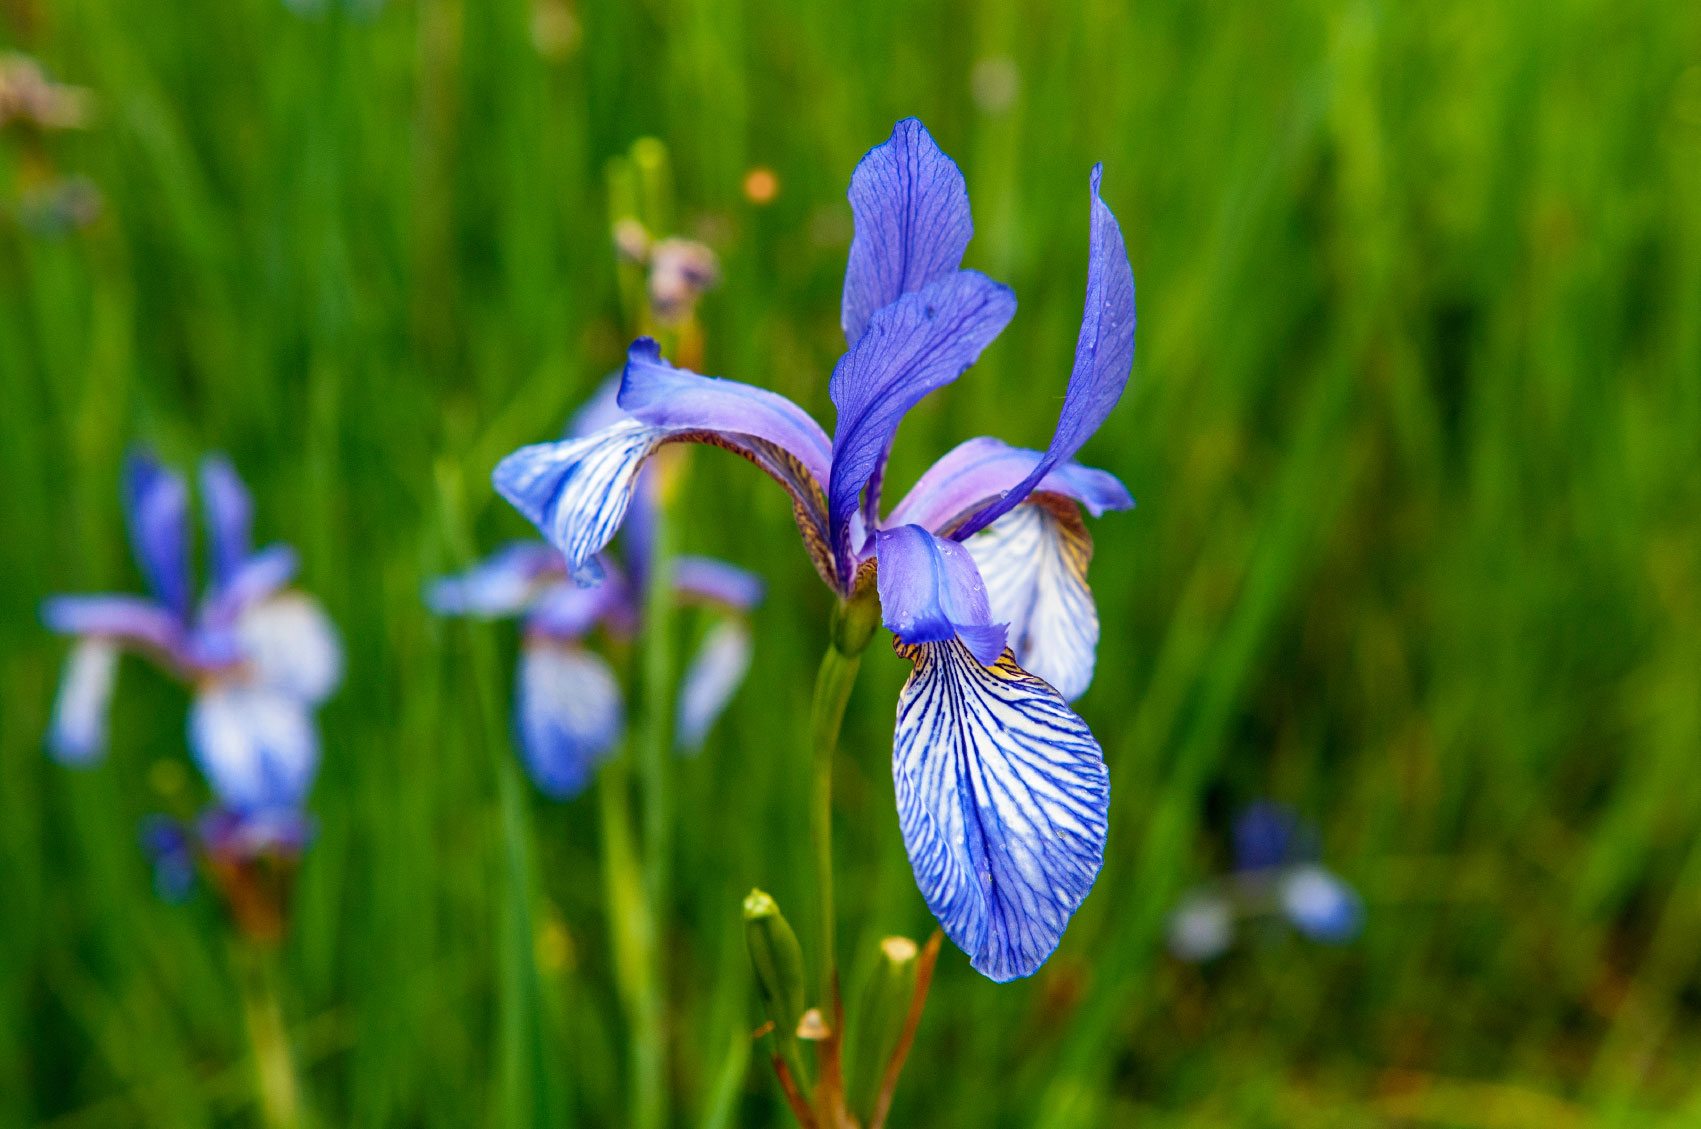 Planting Flag Iris ? Learn About Growing Flag Iris Plants In The Garden